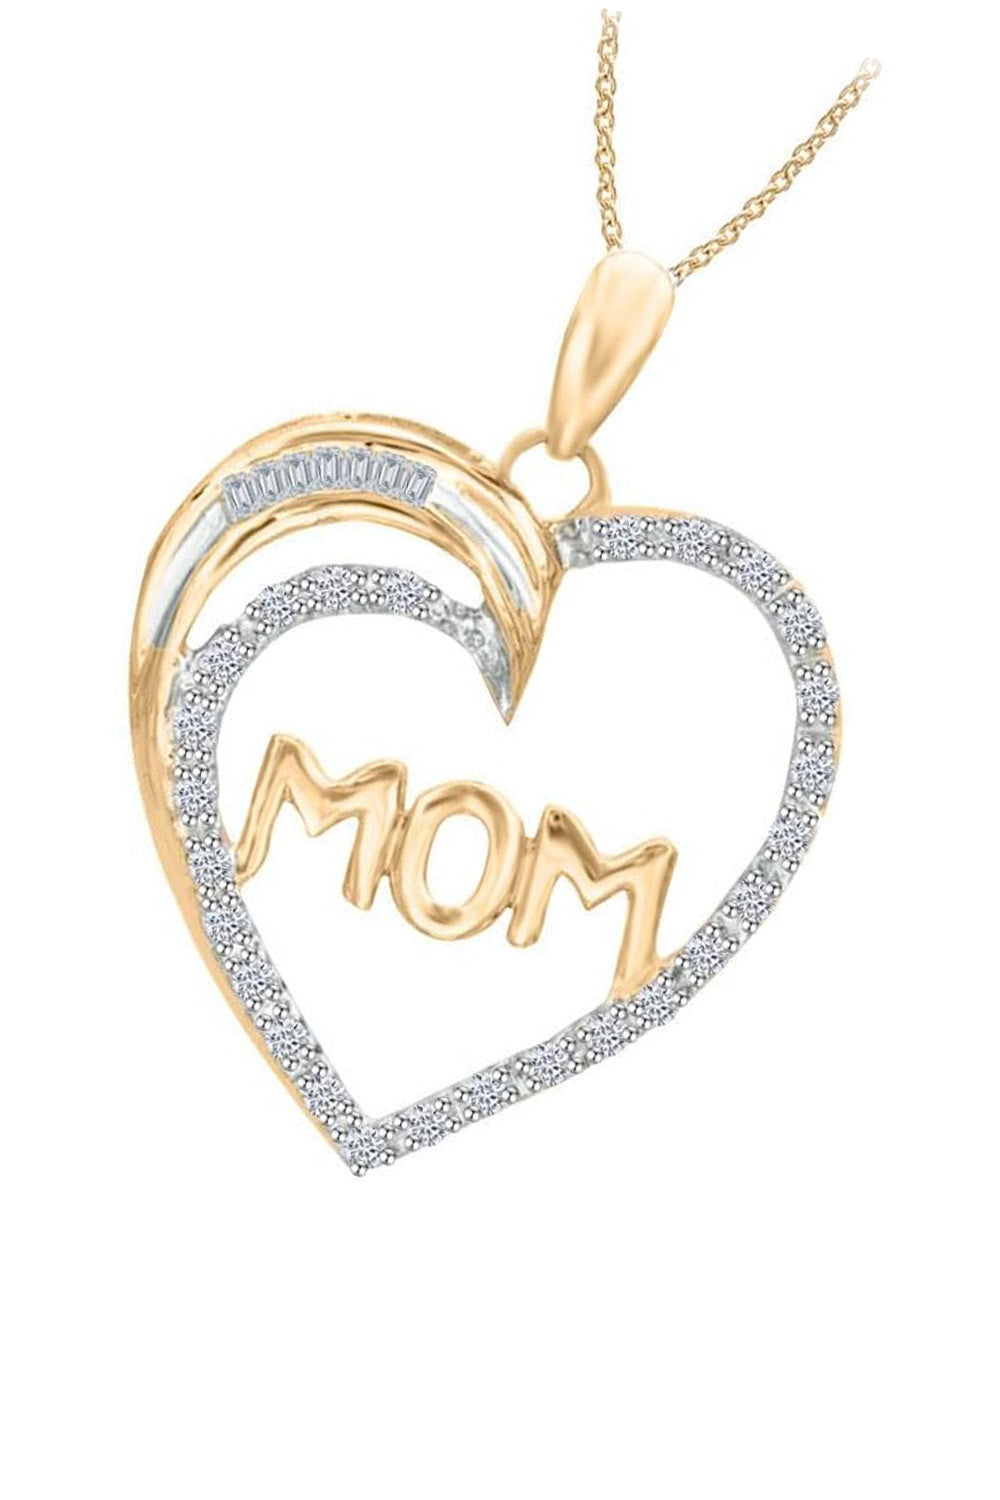 Yellow Gold Color MOM Love Heart Pendant Necklace